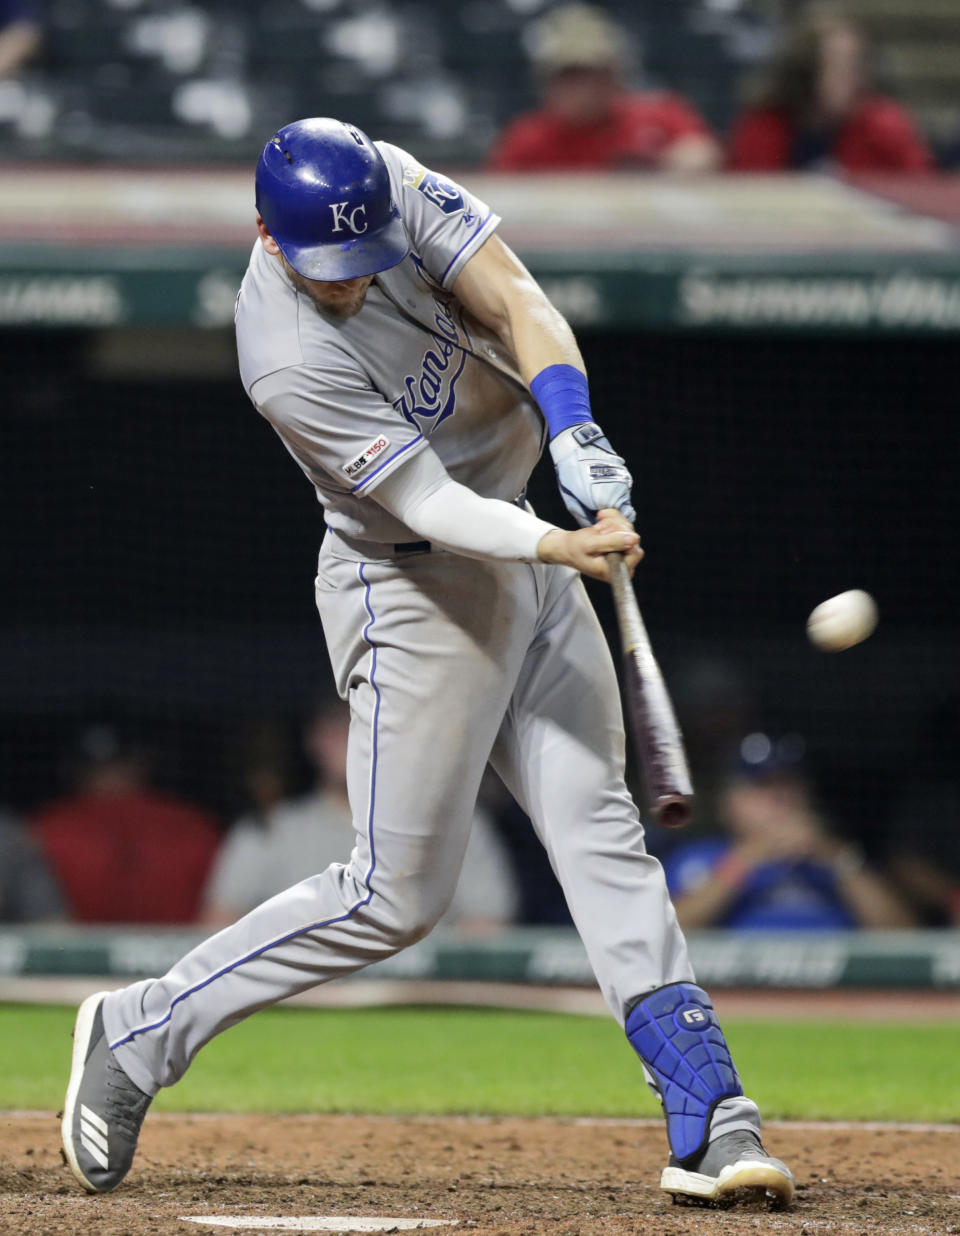 Kansas City Royals' Hunter Dozier hits a grand slam in the ninth inning of a baseball game against the Cleveland Indians, Tuesday, June 25, 2019, in Cleveland. Whit Merrifield, Nicky Lopez and Alex Gordon scored on the play. (AP Photo/Tony Dejak)